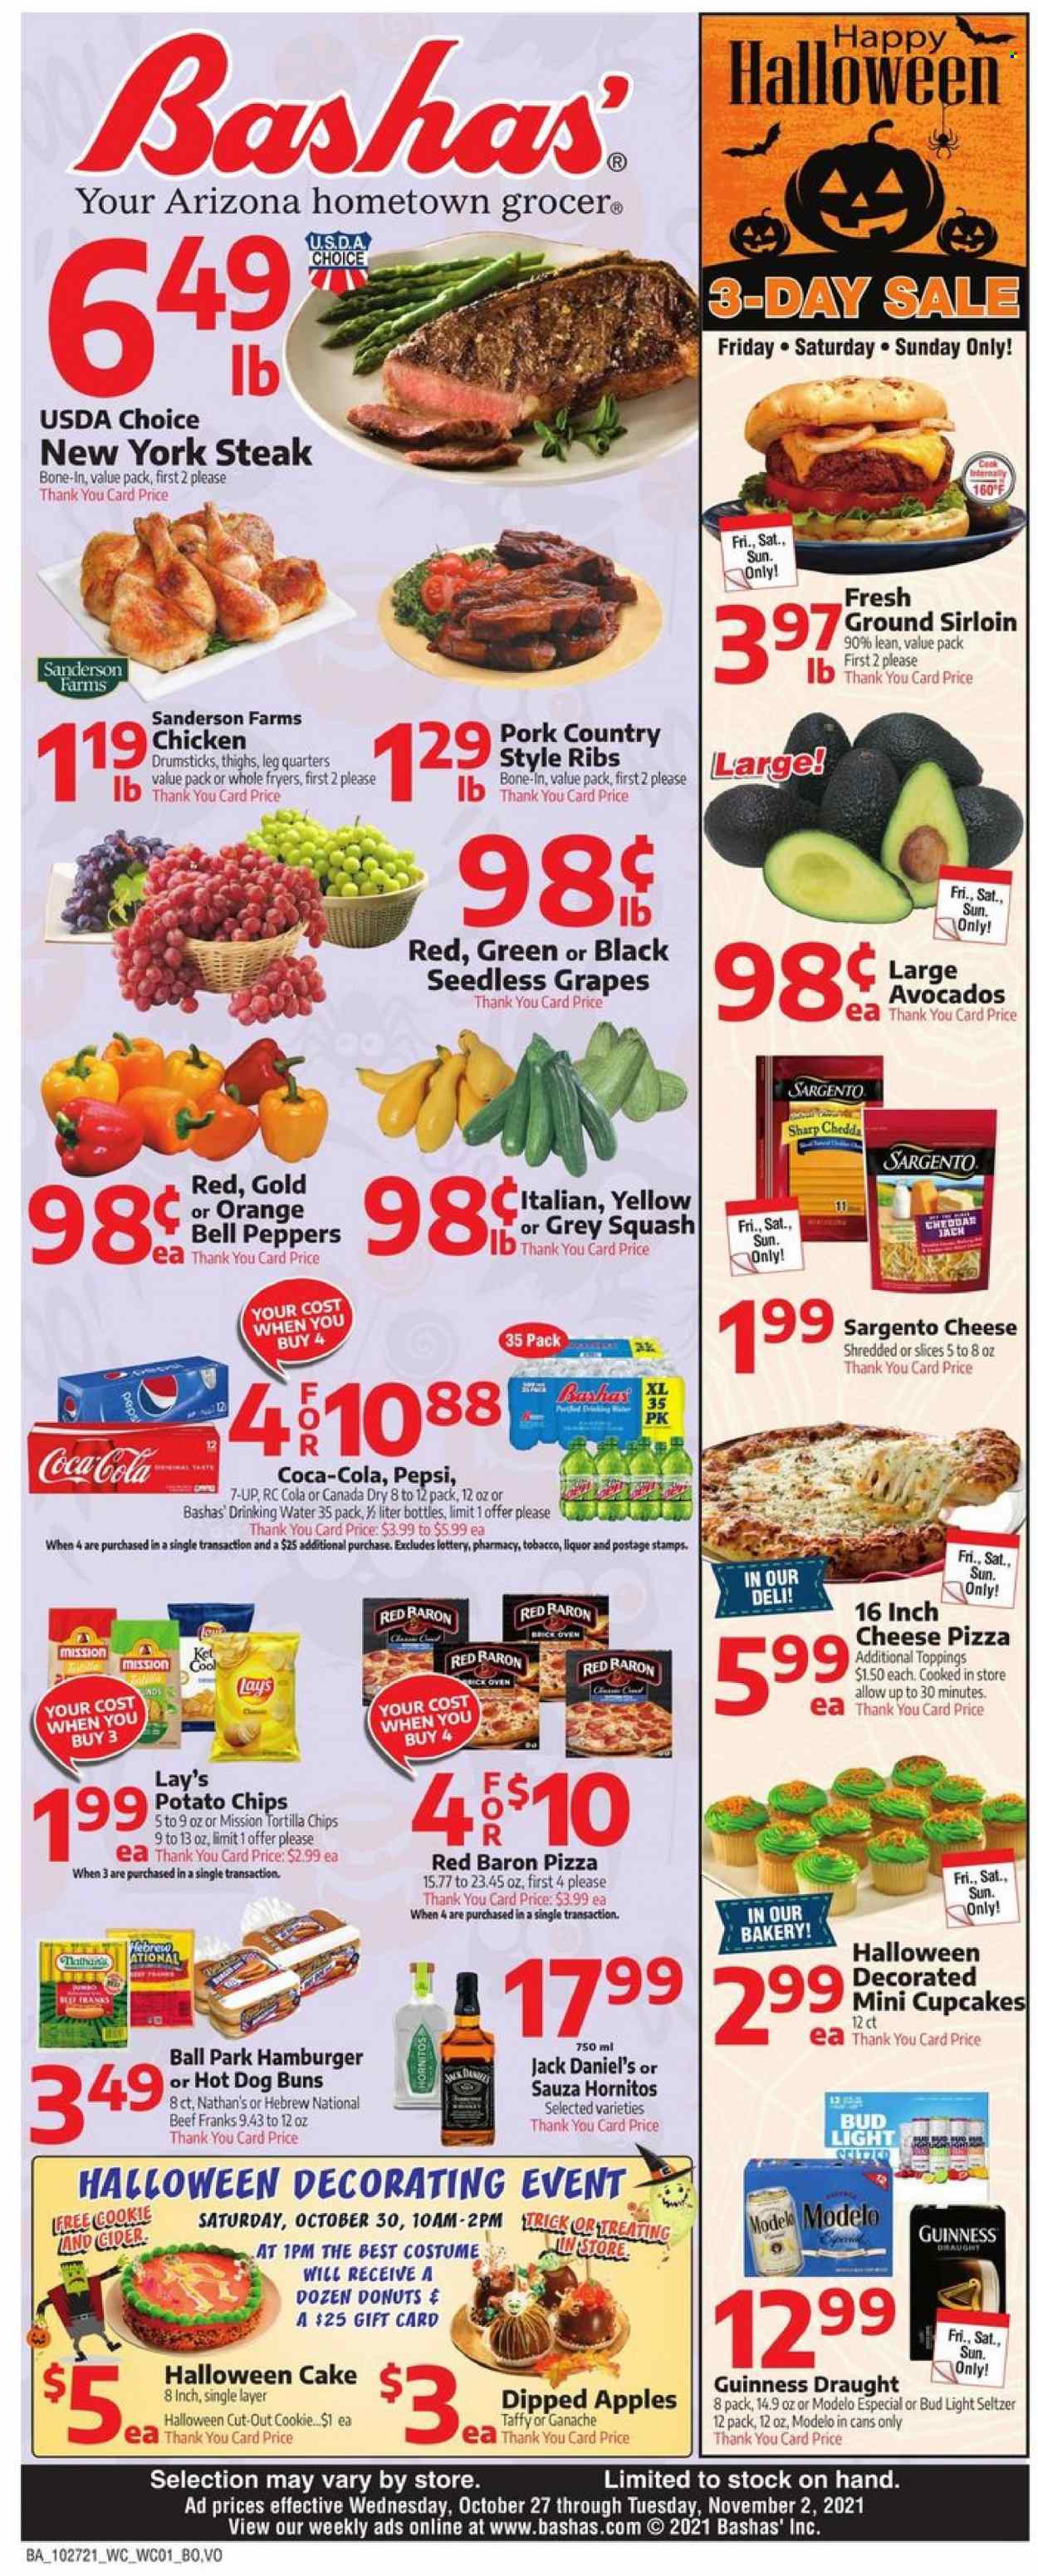 thumbnail - Bashas' Flyer - 10/27/2021 - 11/02/2021 - Sales products - seedless grapes, cake, buns, cupcake, donut, bell peppers, peppers, apples, avocado, grapes, oranges, Jack Daniel's, pizza, Sargento, Red Baron, tortilla chips, potato chips, chips, Lay’s, Canada Dry, Coca-Cola, Pepsi, 7UP, liquor, Hard Seltzer, beer, Bud Light, Guinness, Modelo, chicken drumsticks, steak. Page 1.